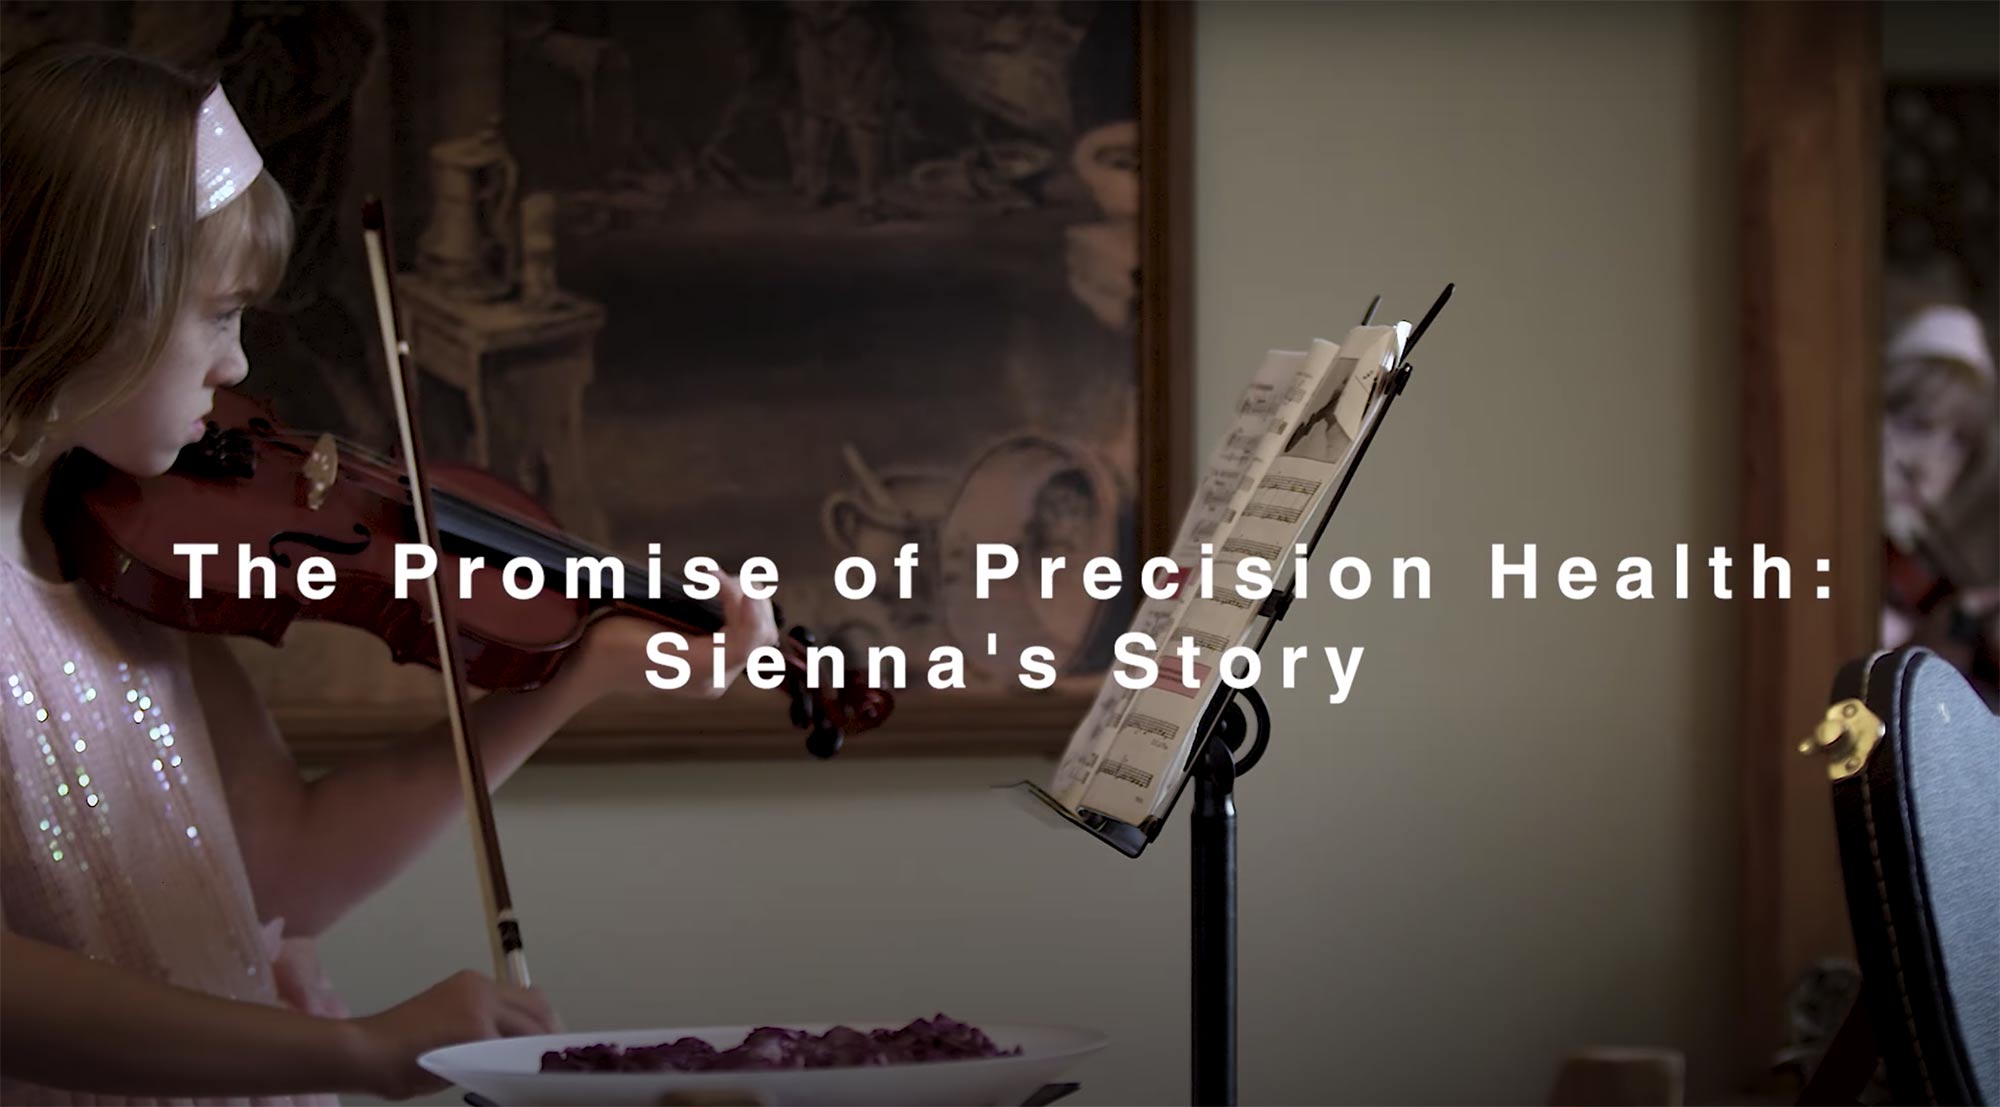 The Promise of Precision Health: Sienna’s Story